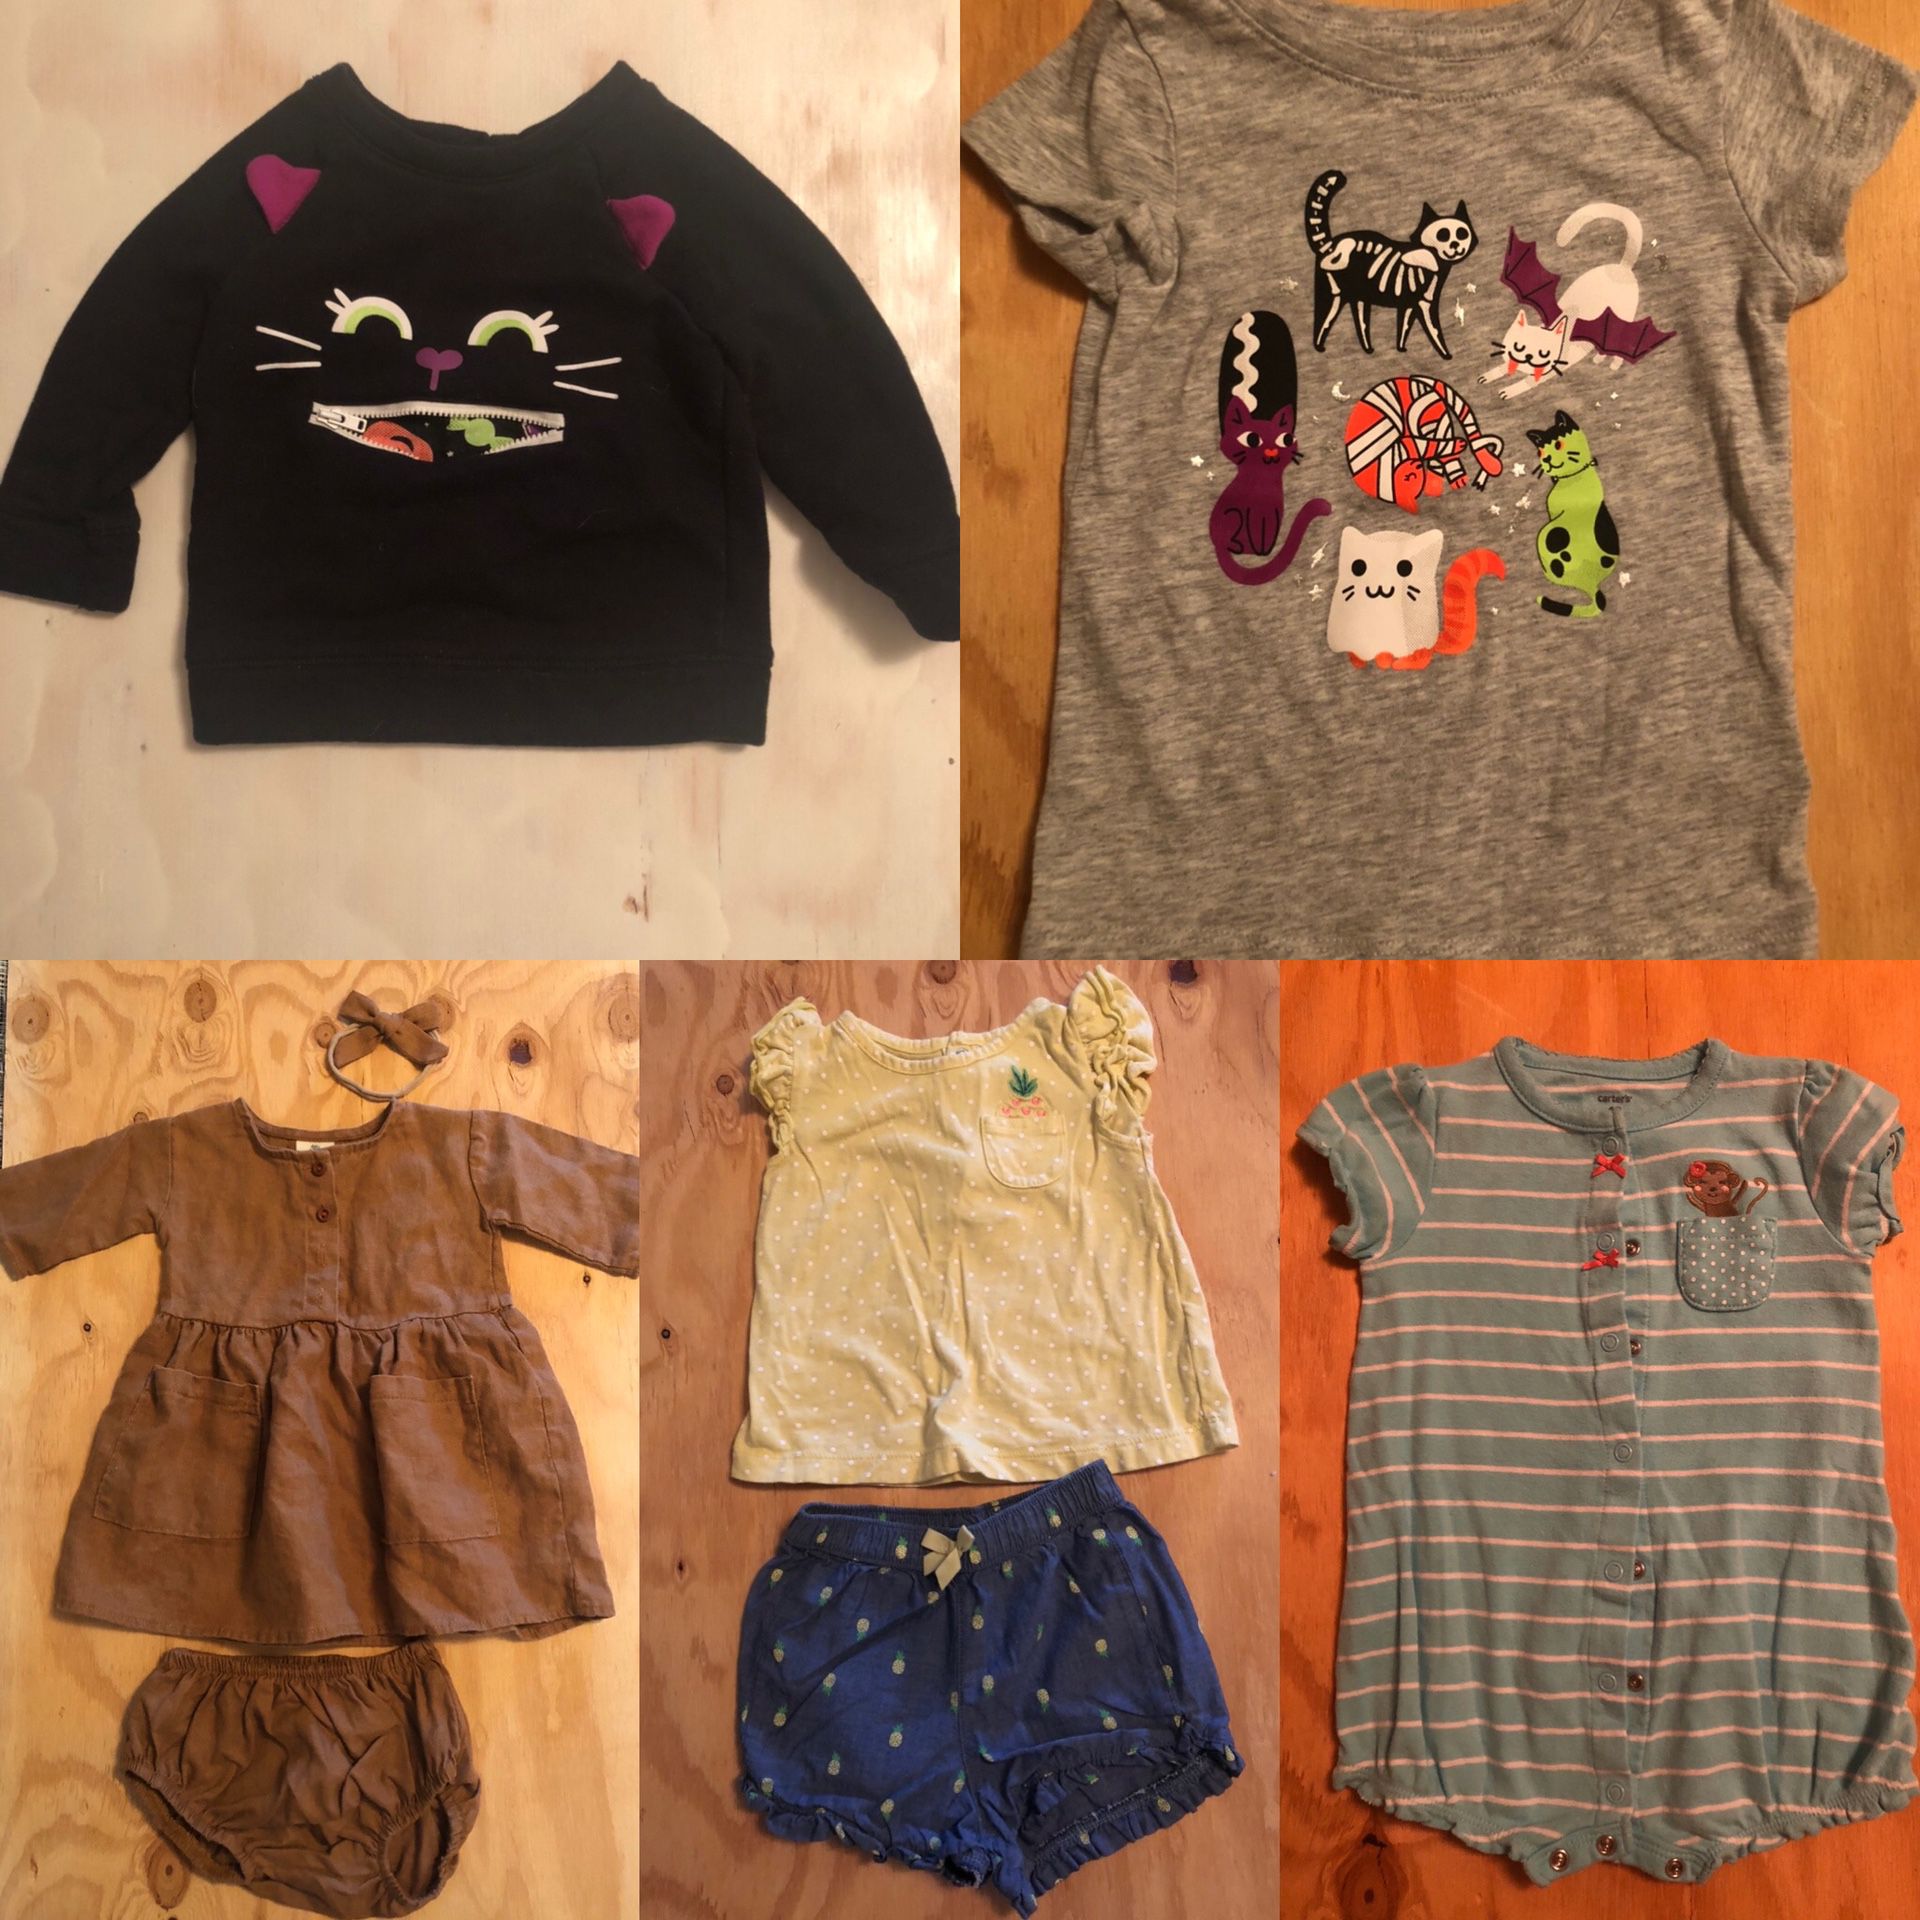 12 month old baby girl outfits